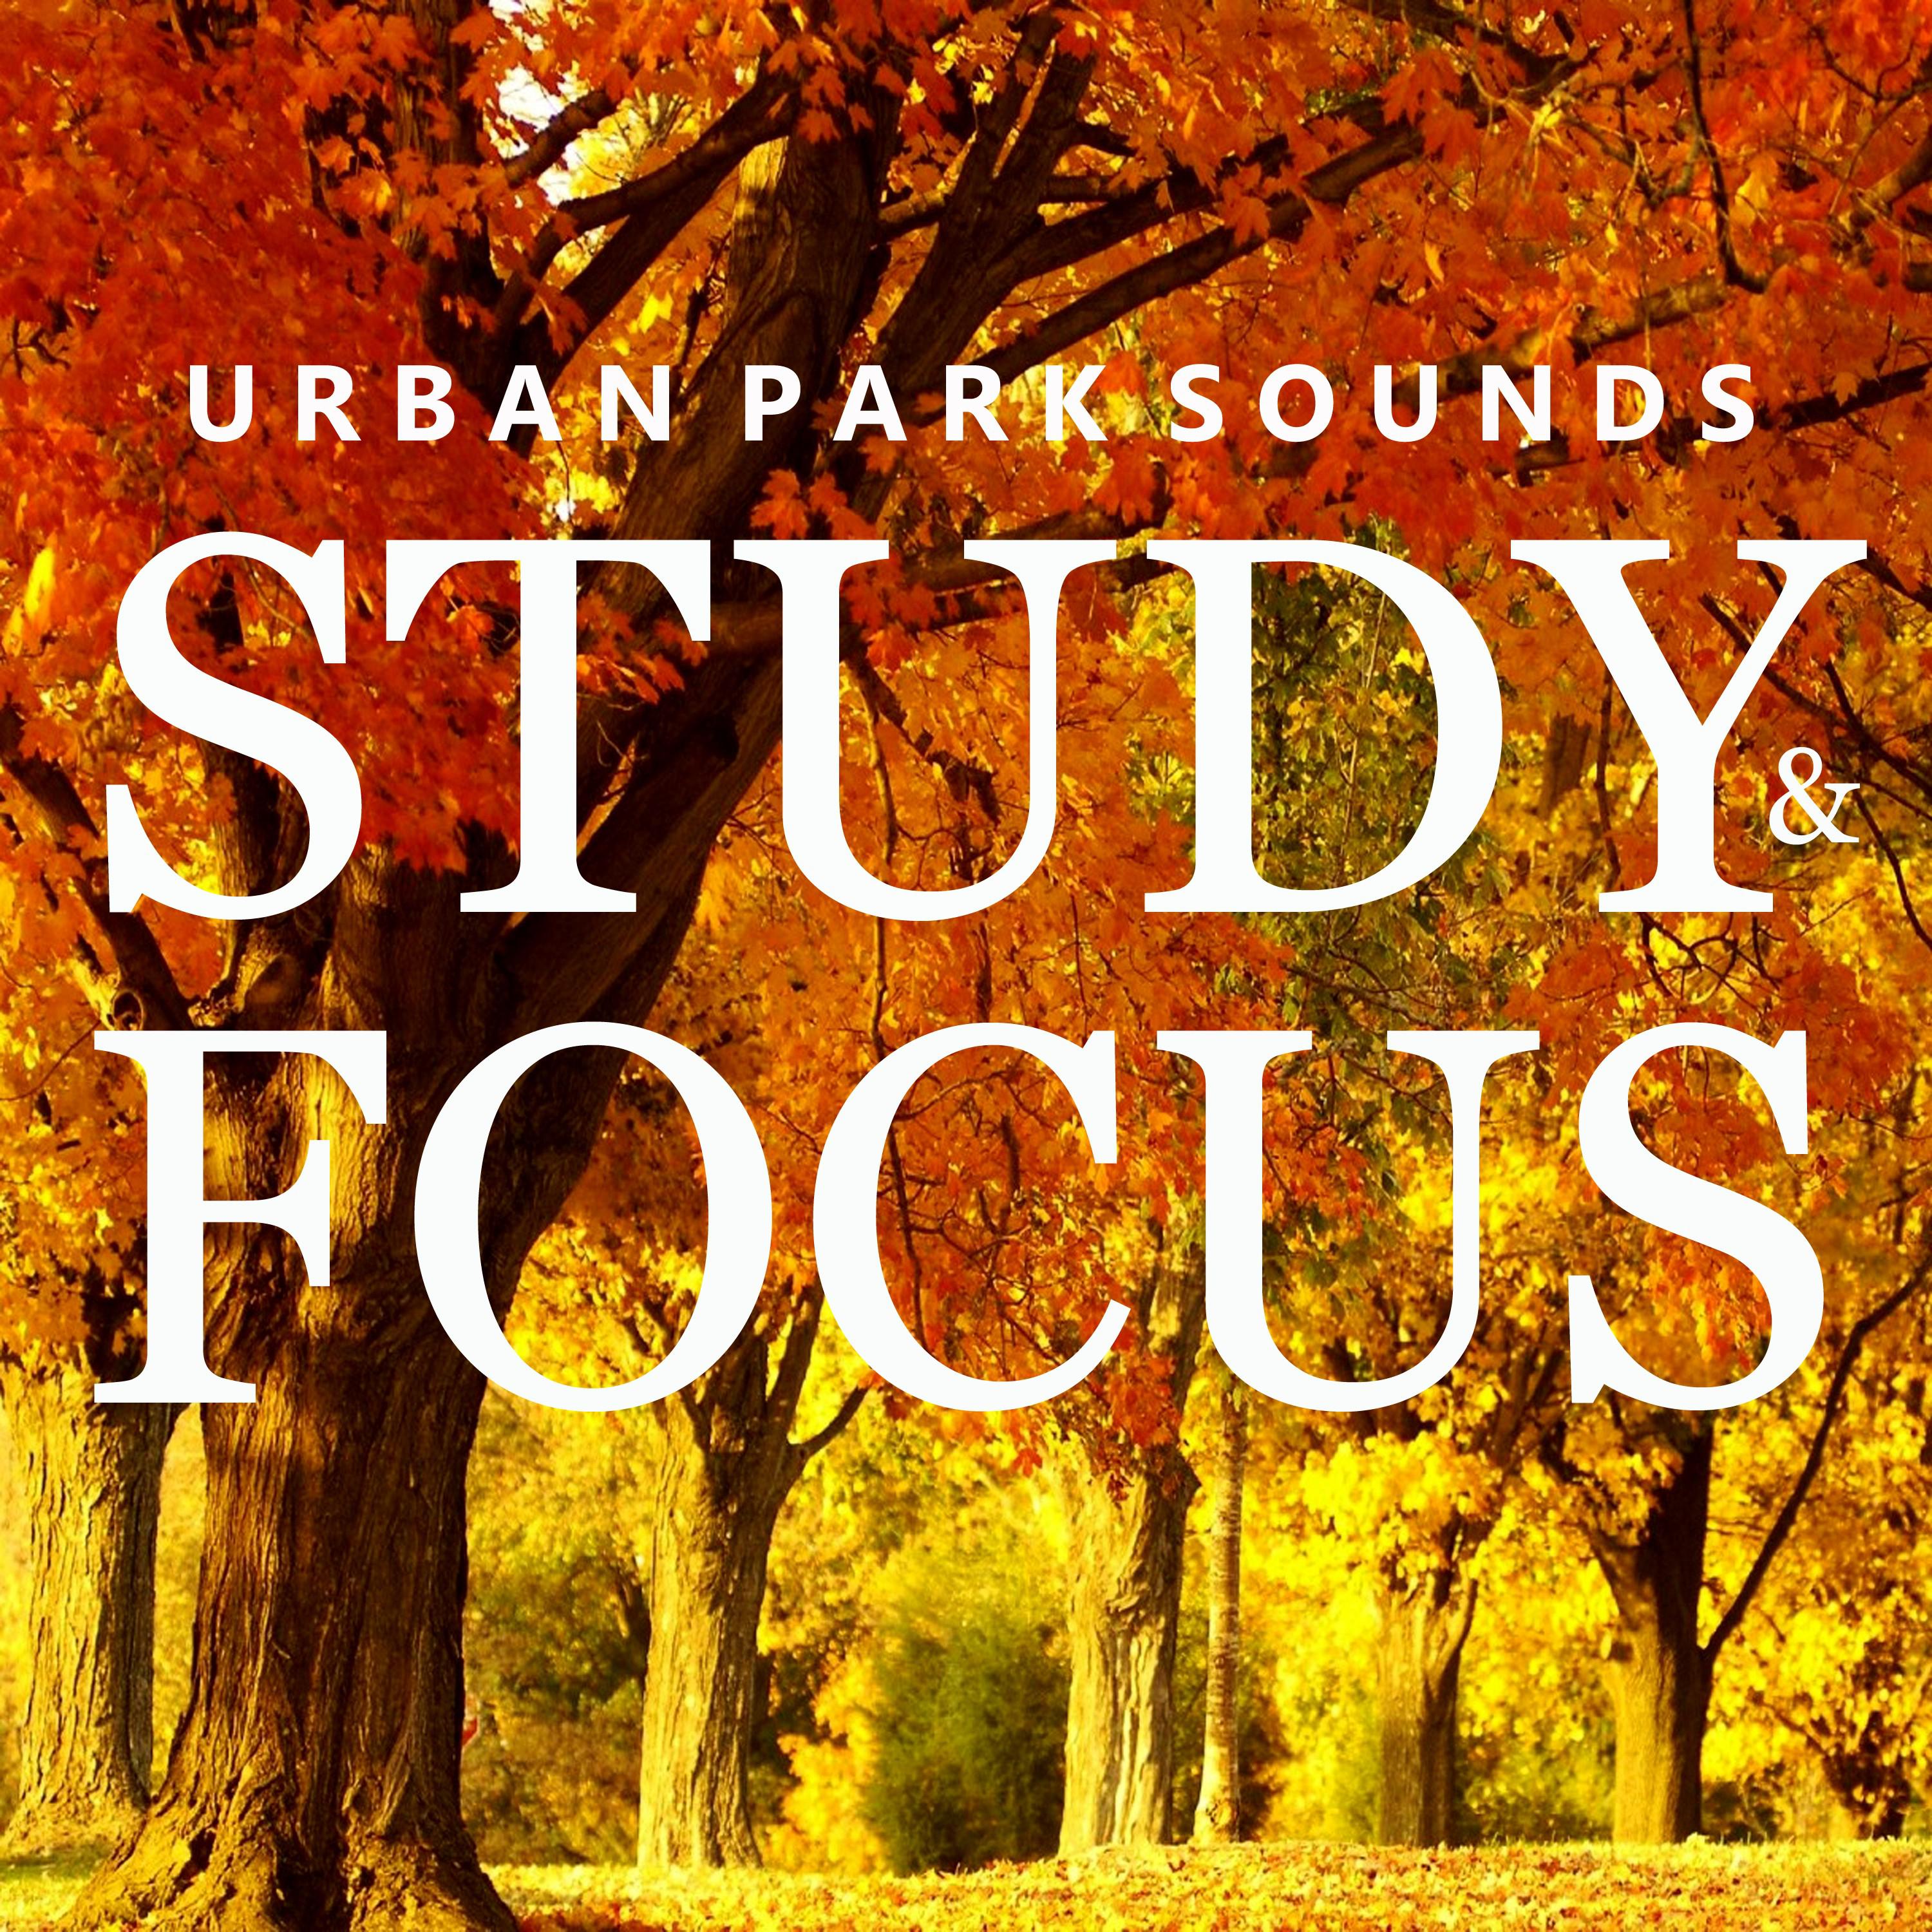 Urban Park Sounds for Studying, Pt. 19